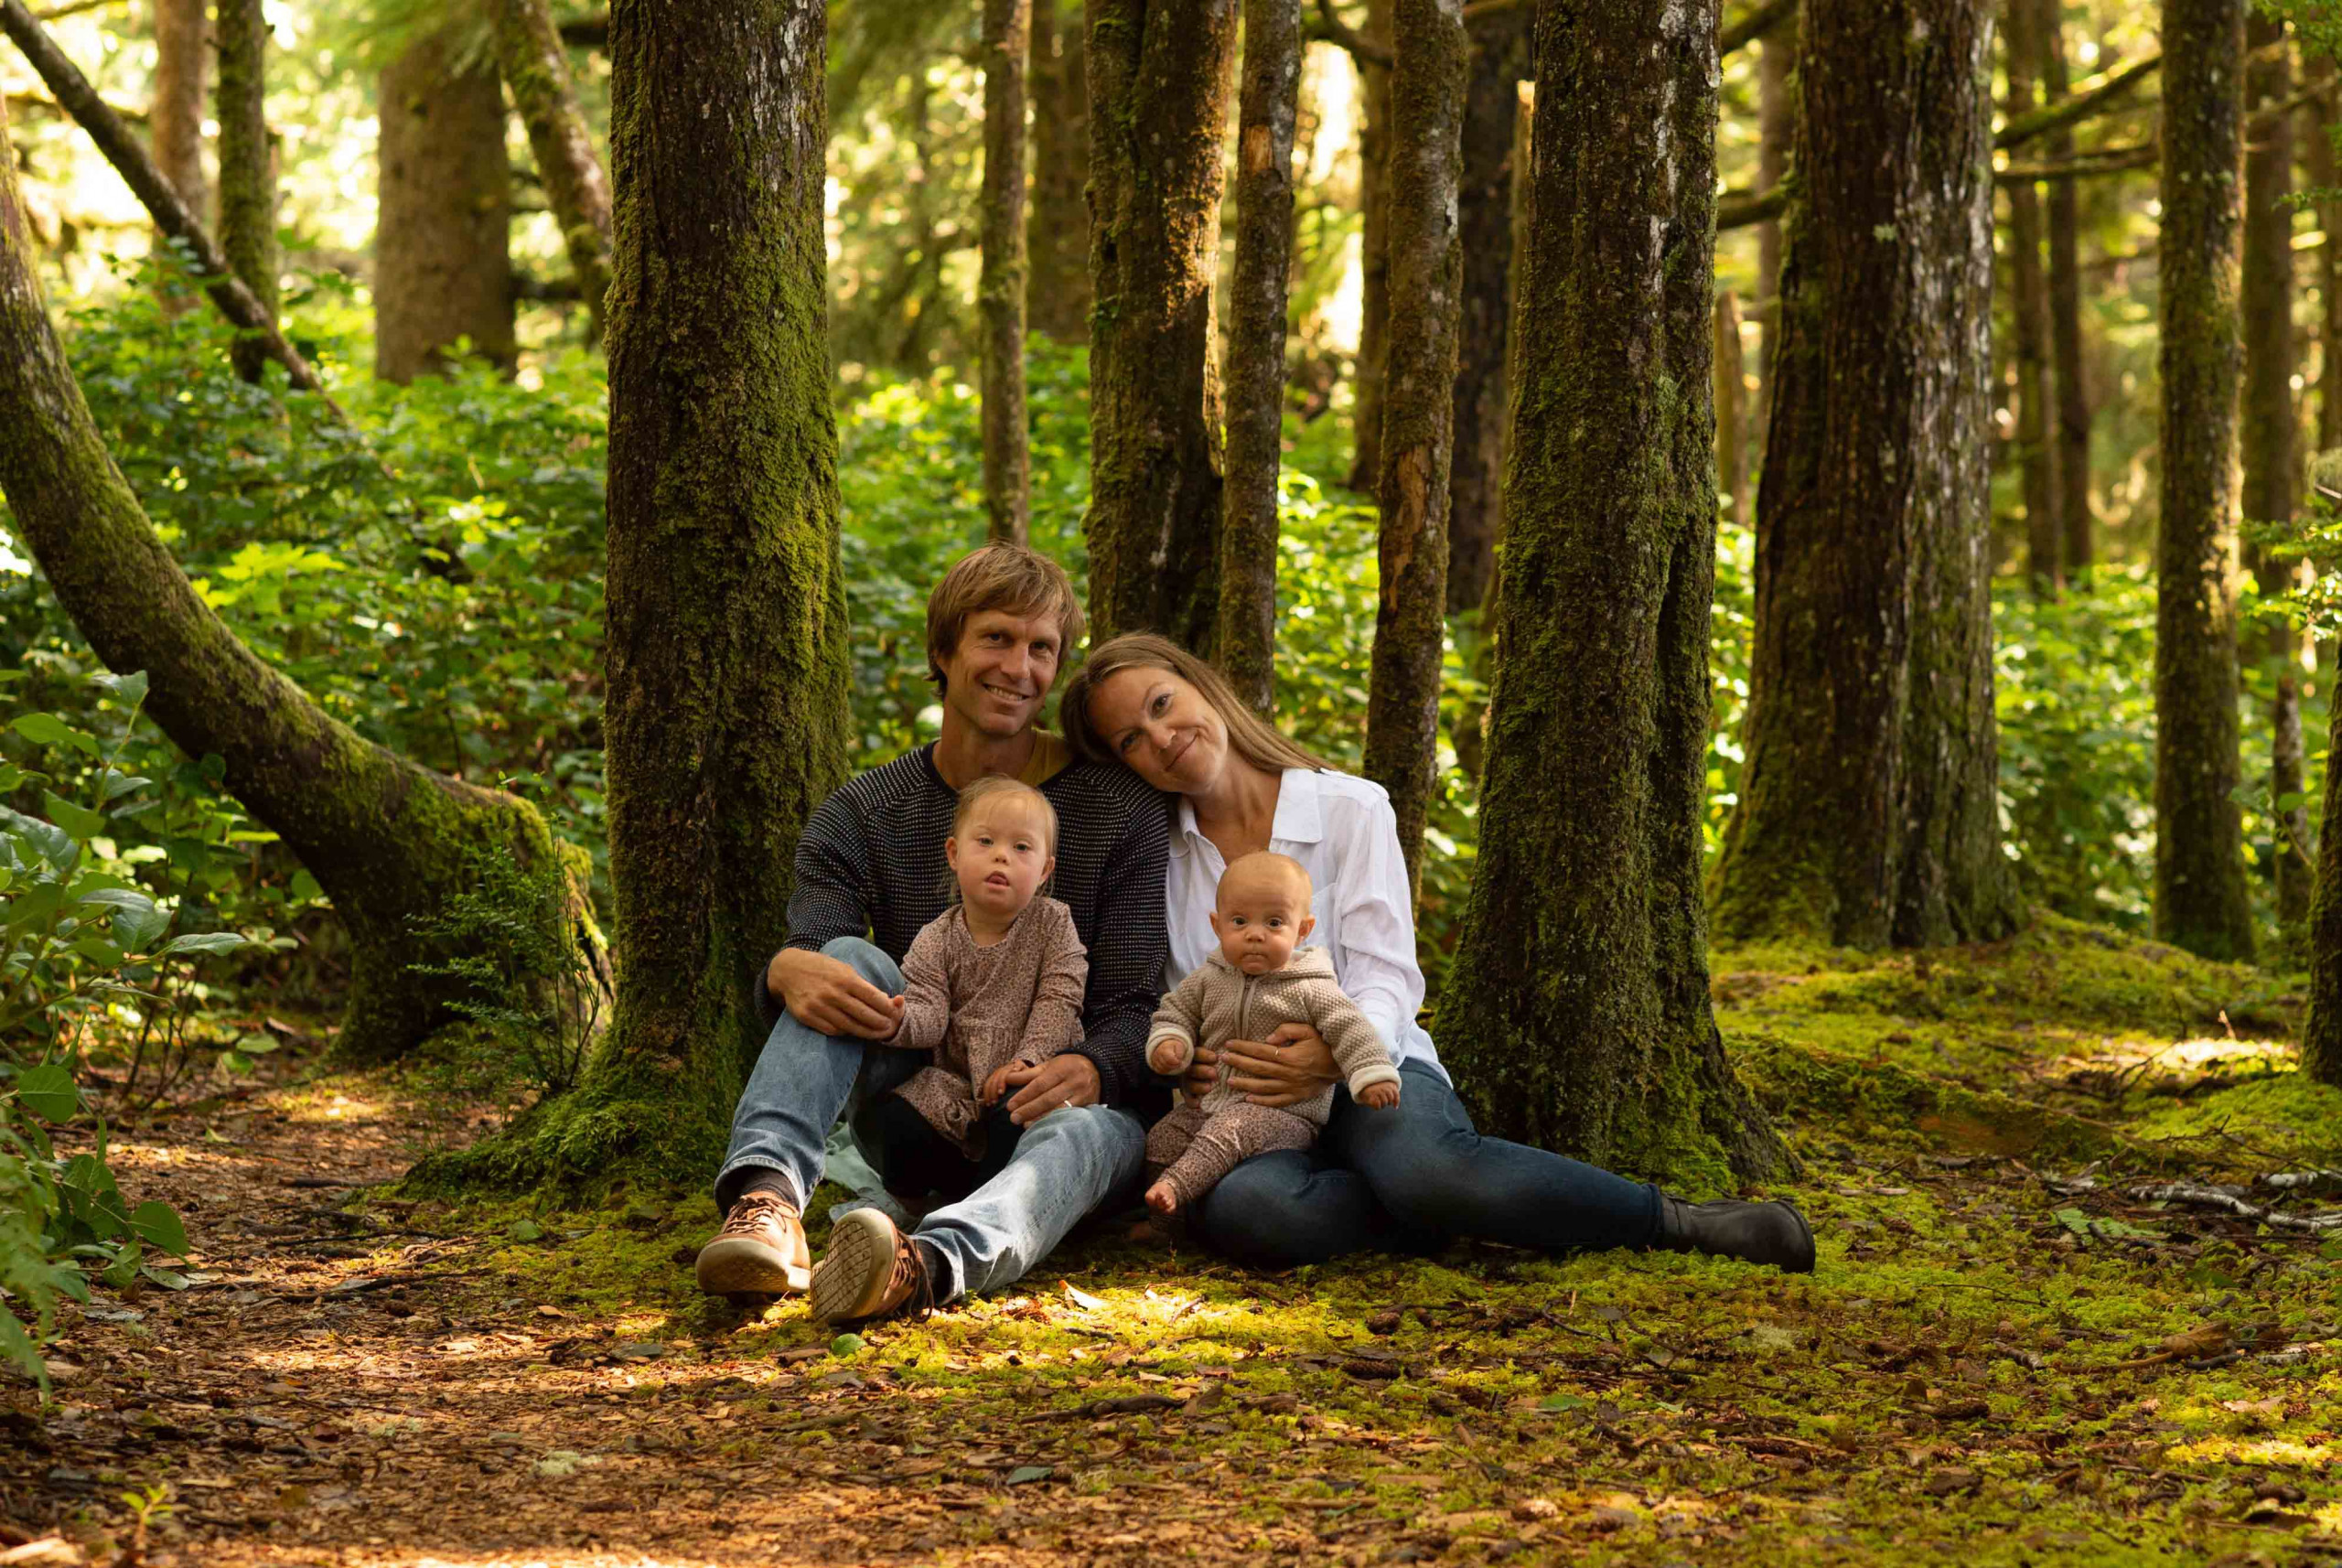 Island family in the forest - helping Island families access the health care for their kids